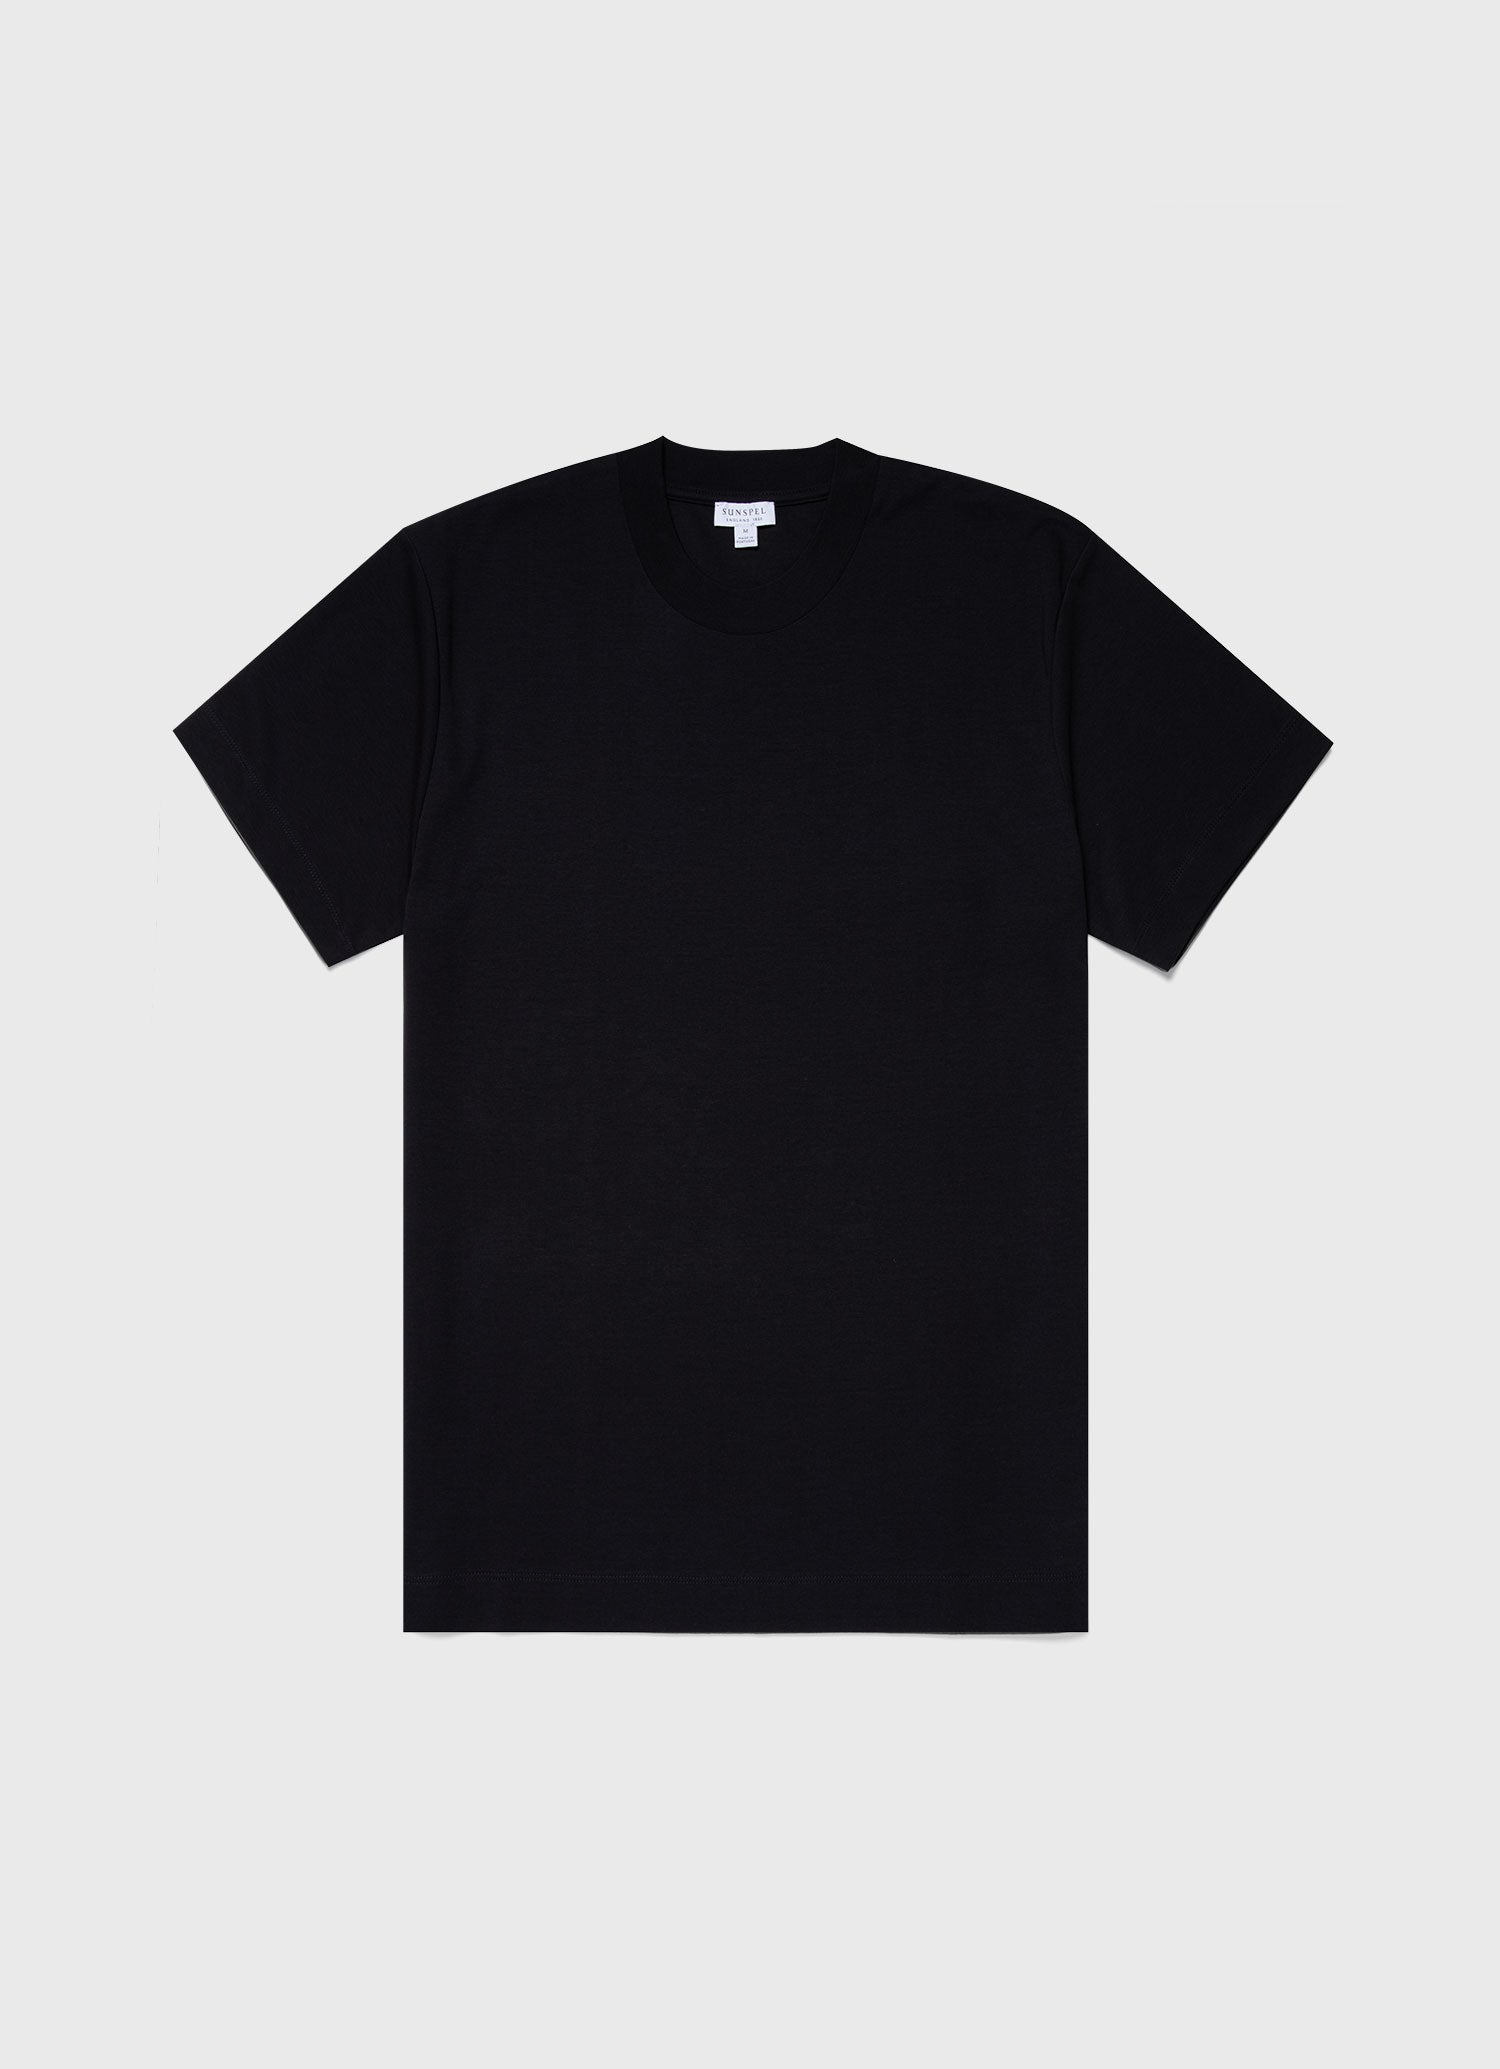 Men's Relaxed Fit Heavyweight T-shirt in Black